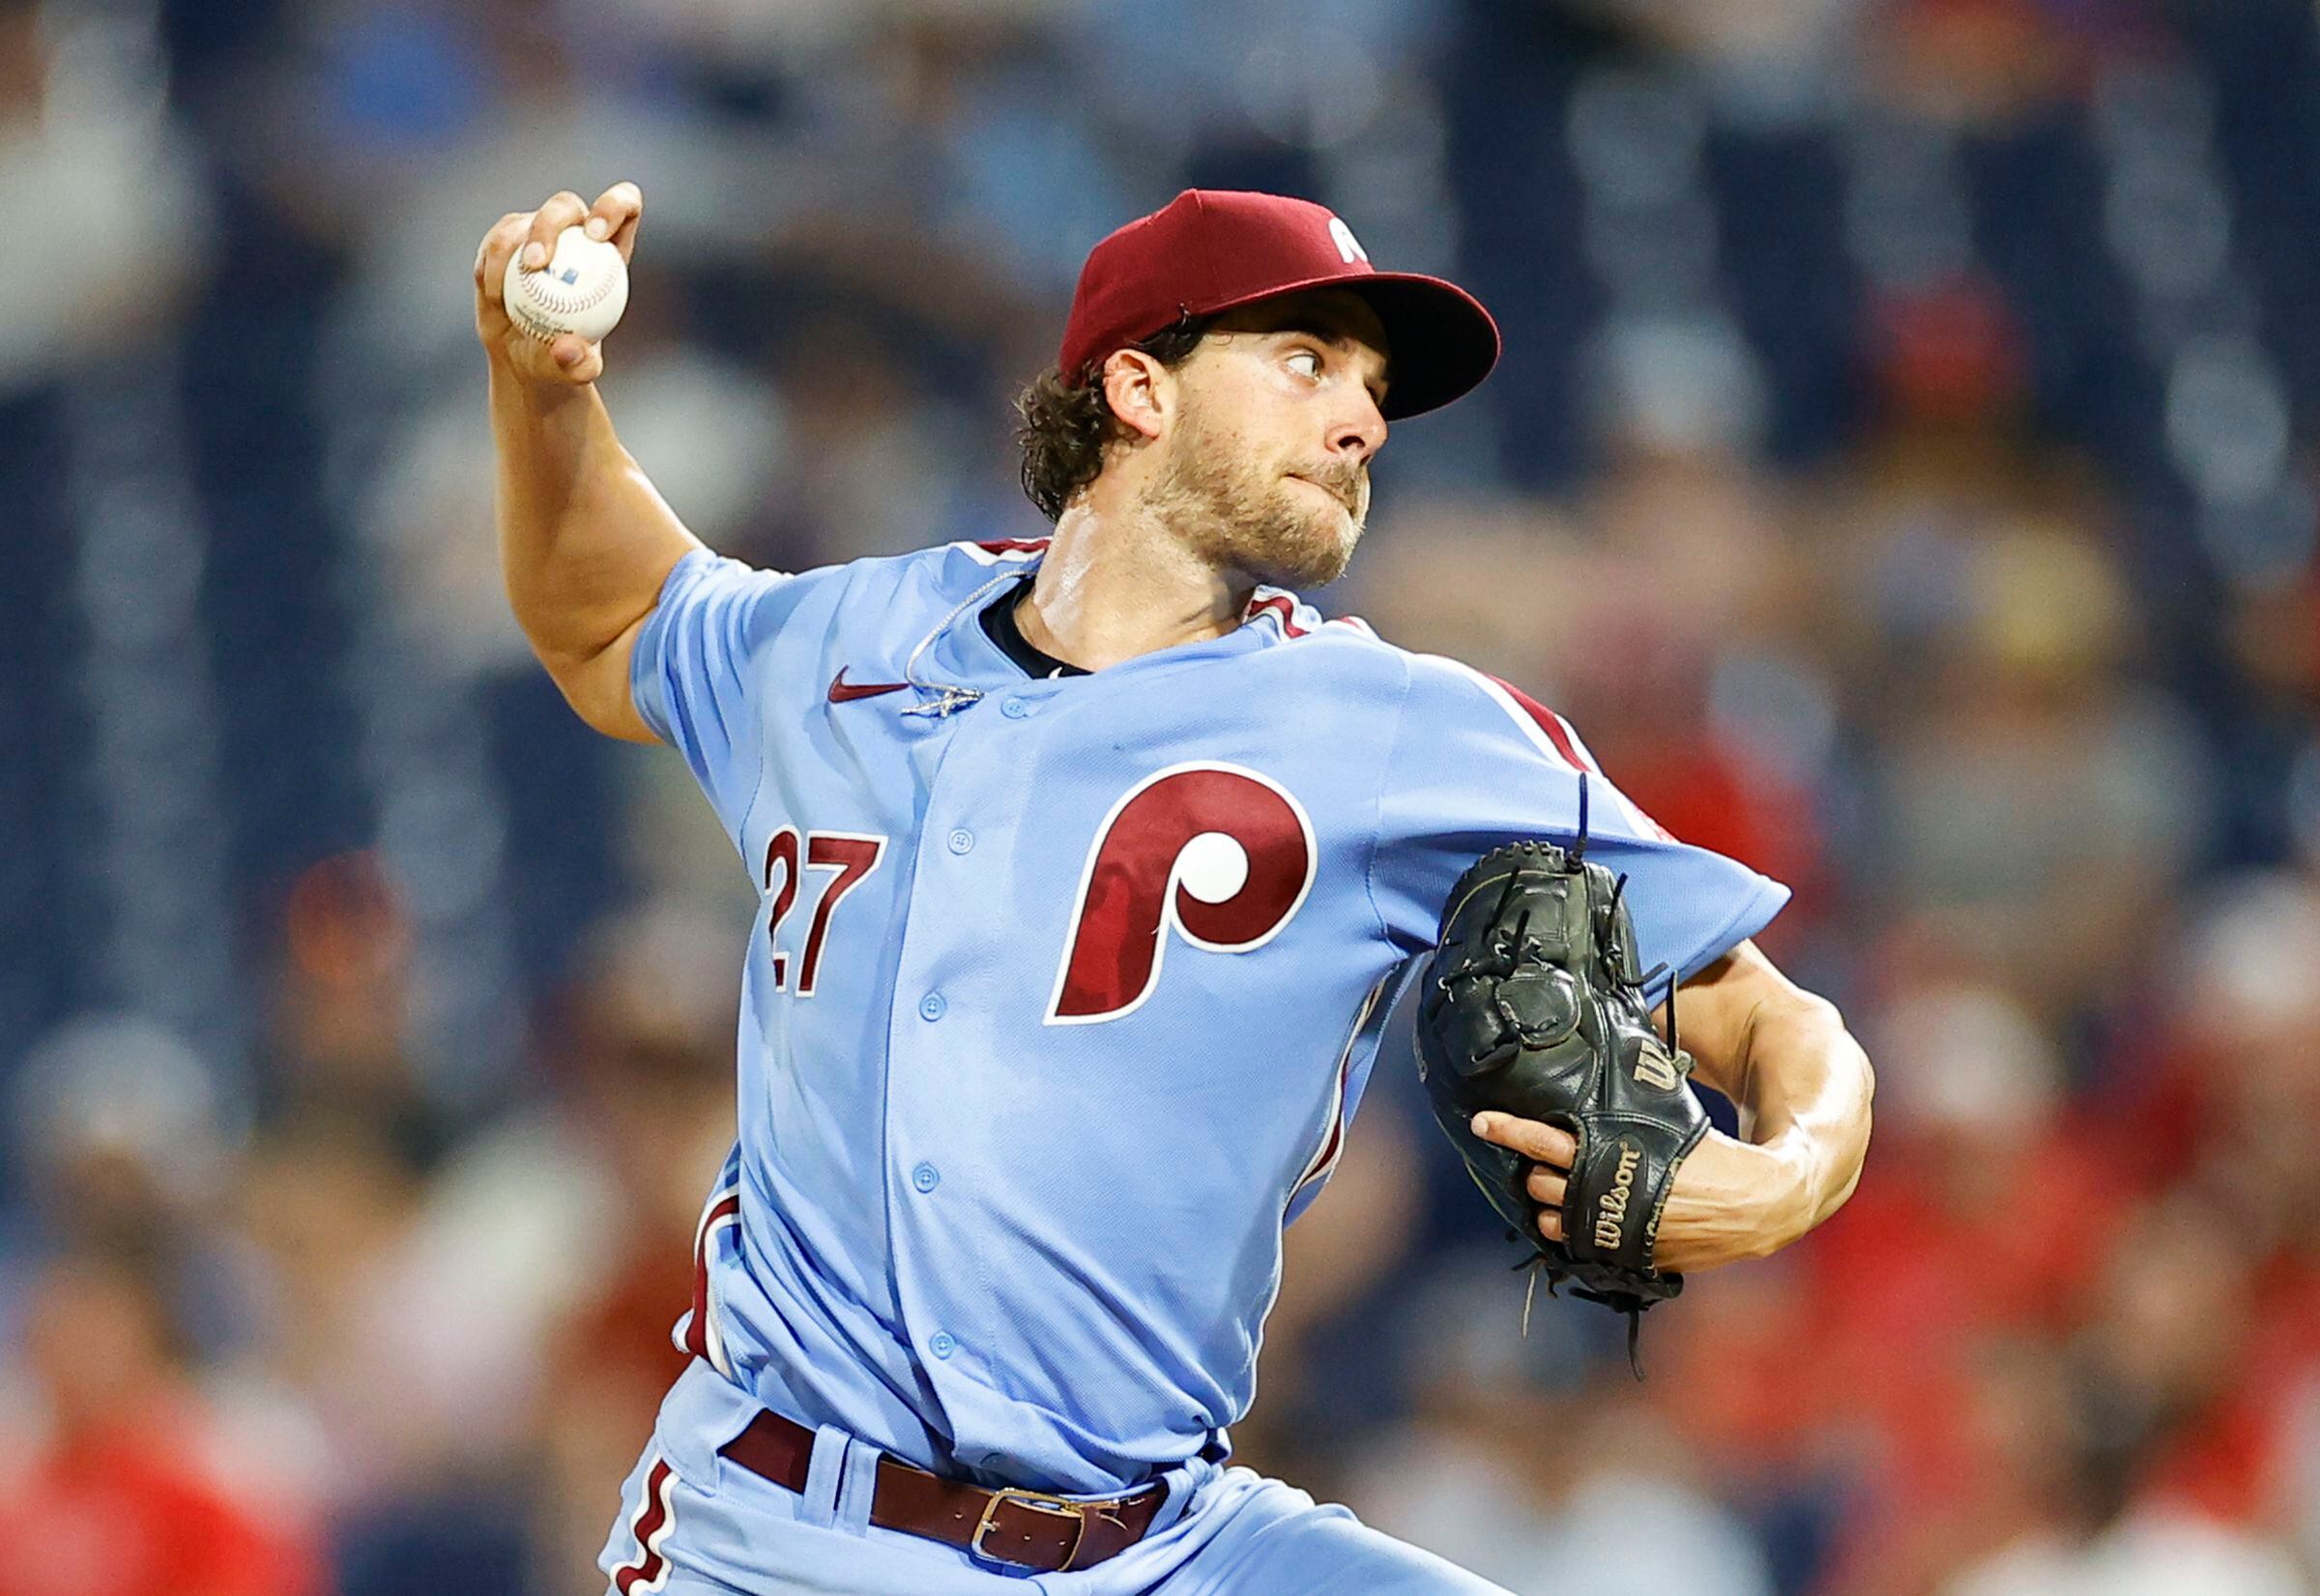 Aaron Nola strikes out 11 Reds as Phillies sweep four-game series